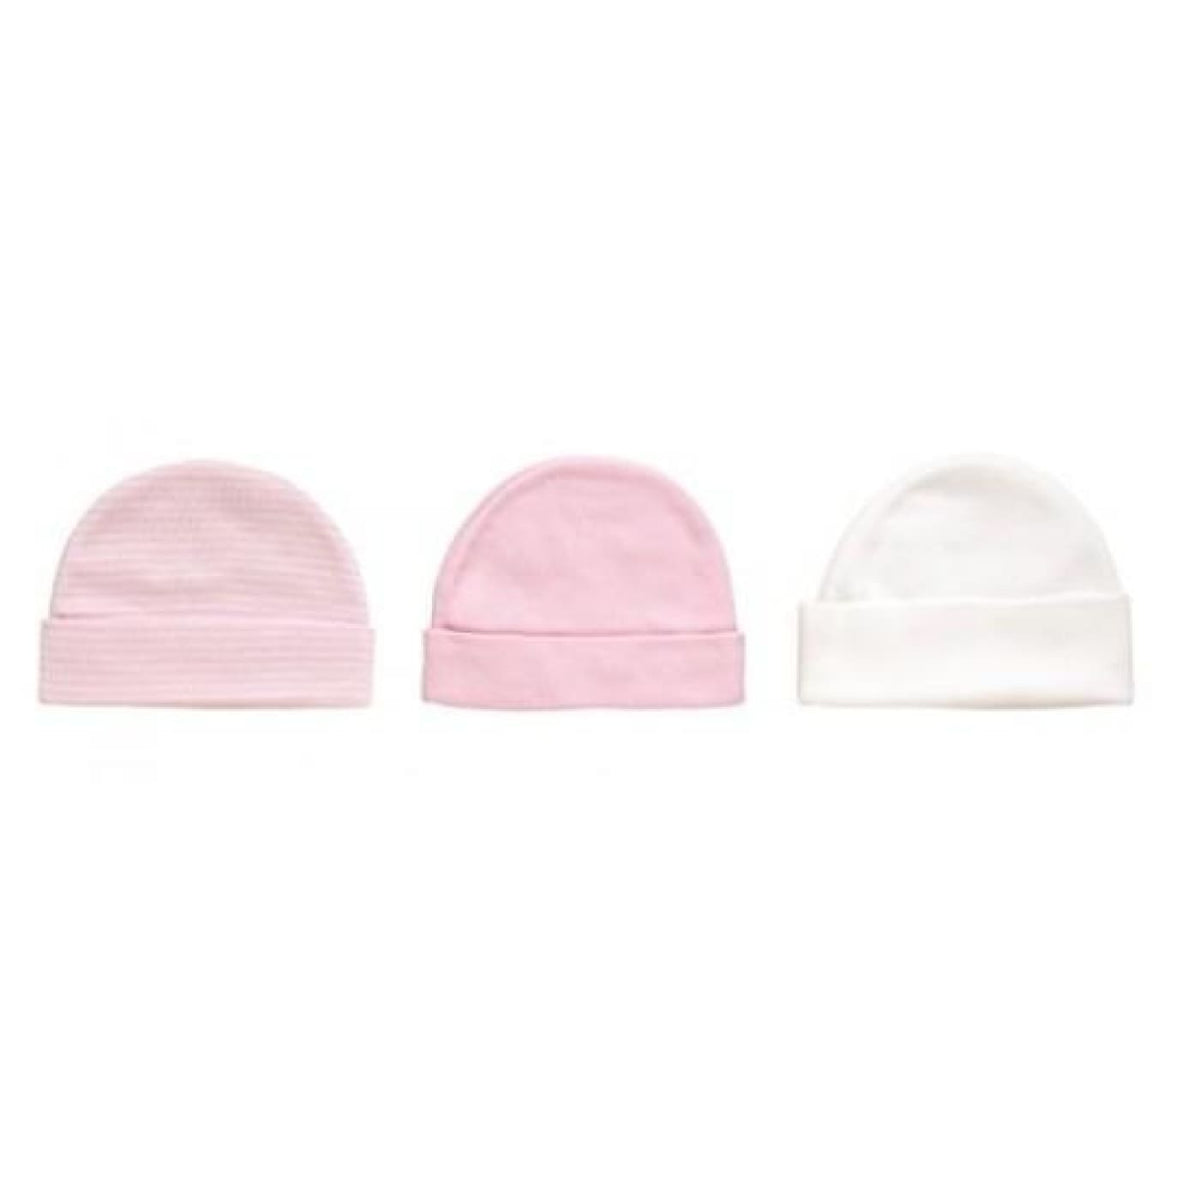 Playette Preemie Caps - Pink/White 3PK - Prem / Pink/White - BABY &amp; TODDLER CLOTHING - BEANIES/HATS